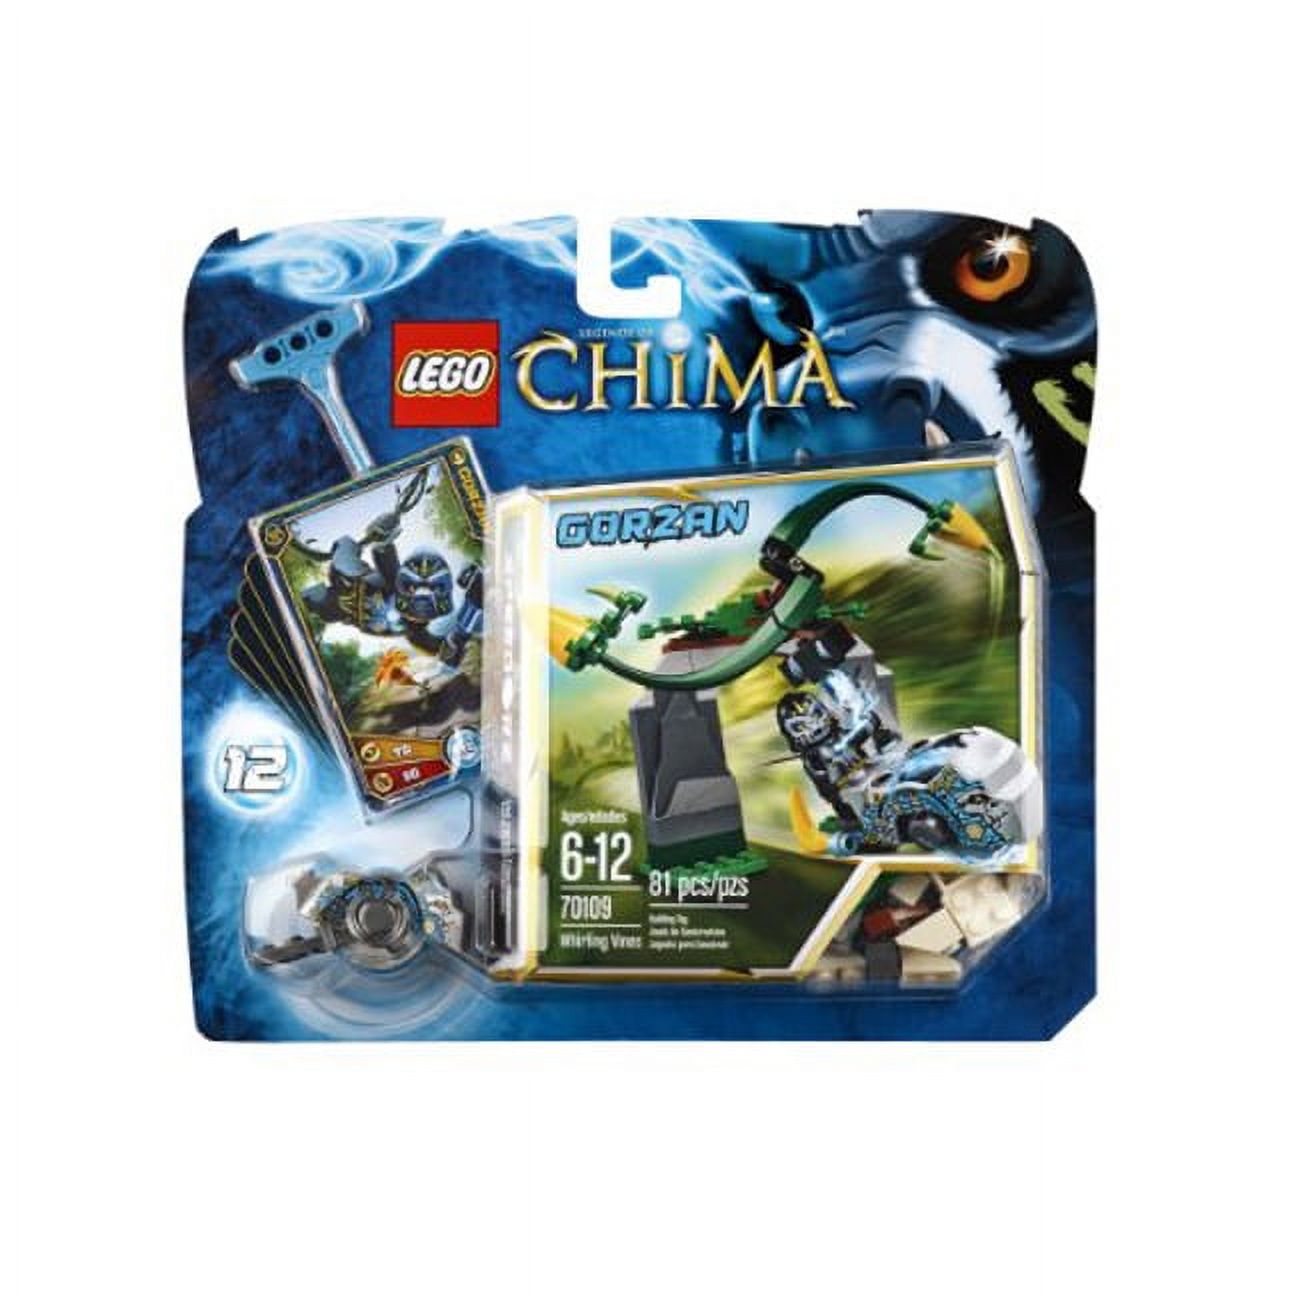 LEGO Chima Whirling Vines Play Set - image 1 of 7